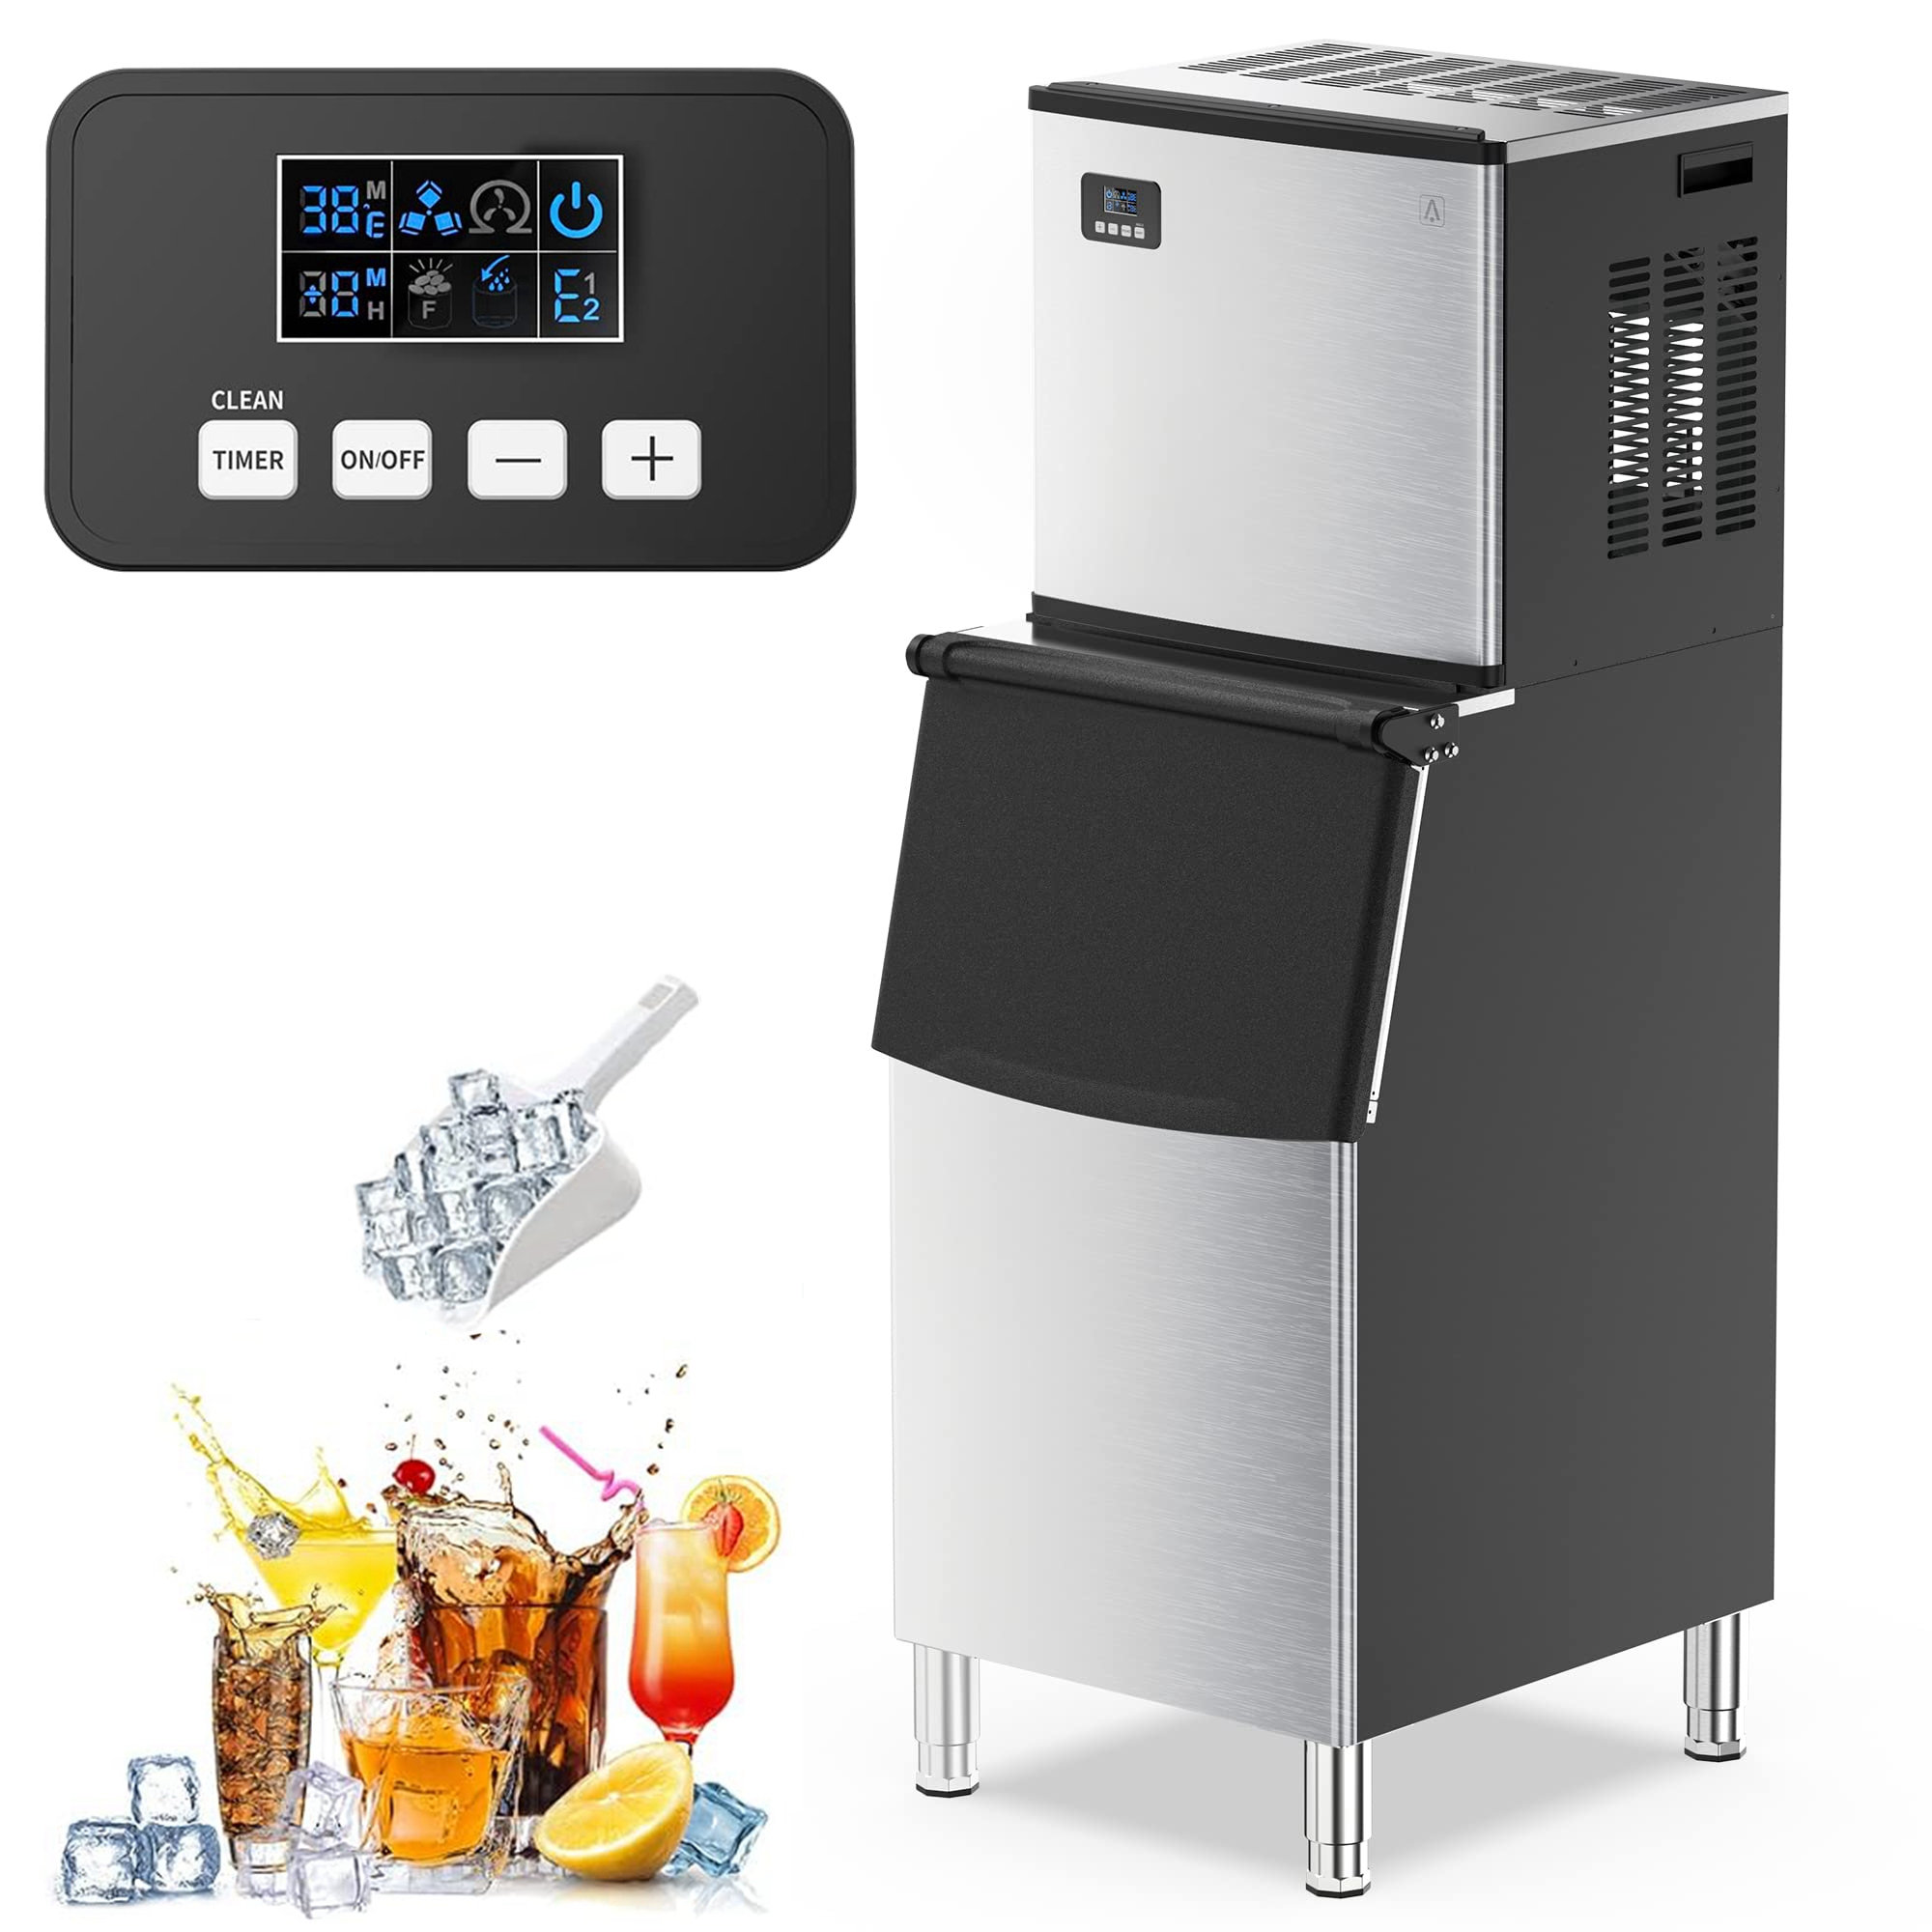 Ice machine 350 - 400lb commercial ice maker